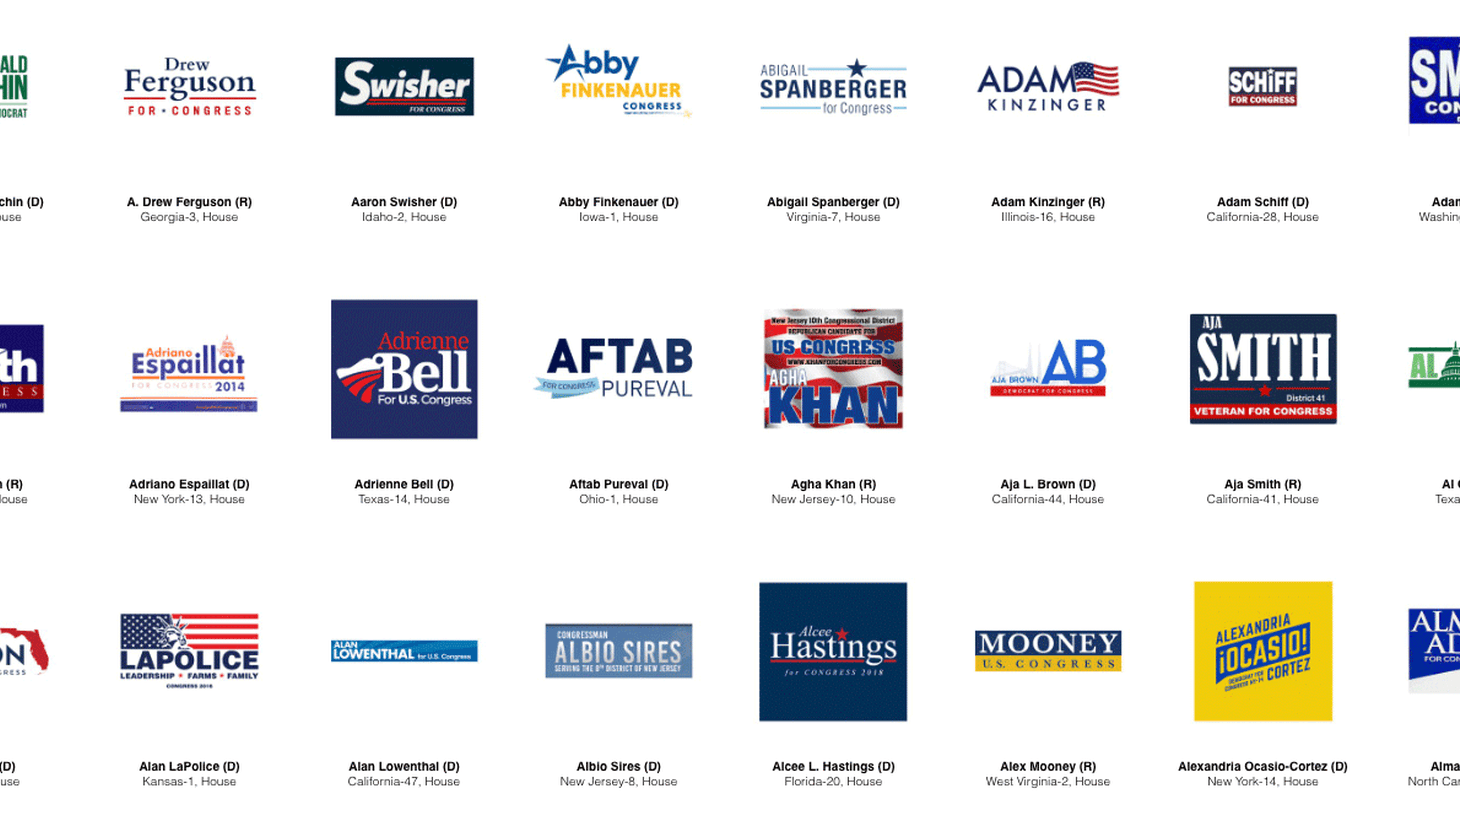 Campaign Logo - What does the design of a political logo say about the candidate?